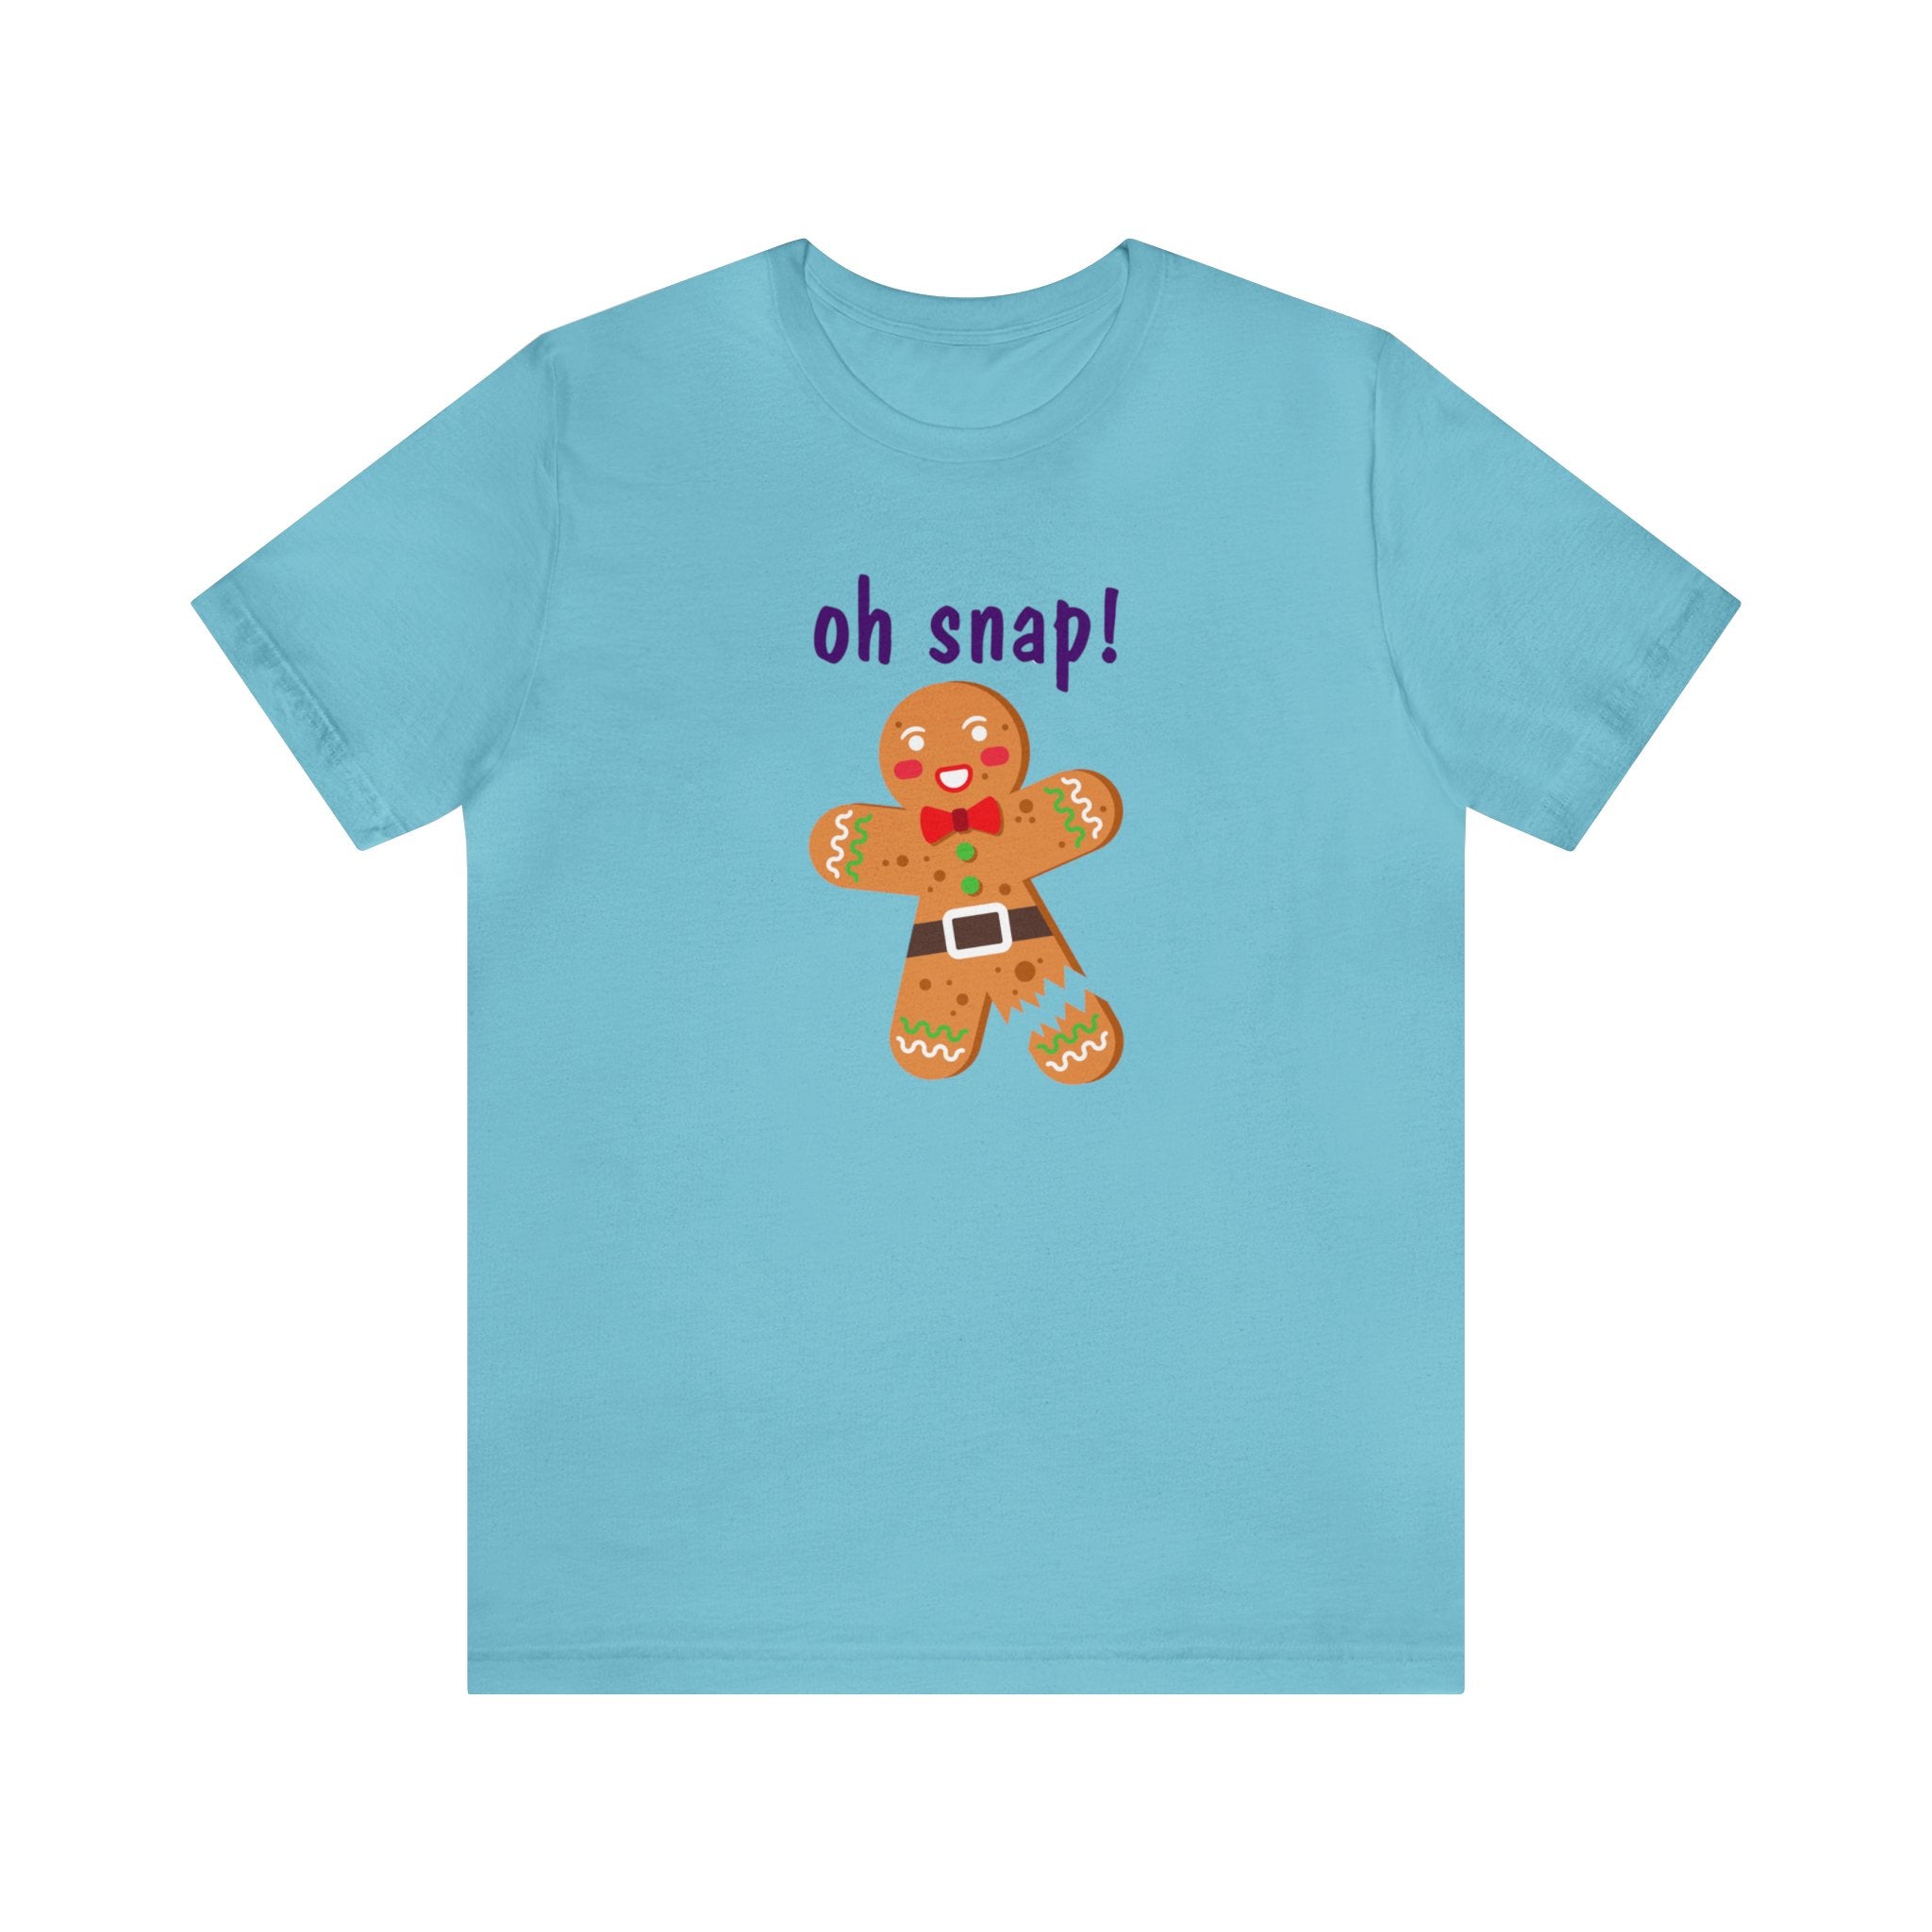 Oh Snap! Gingerbreadman : Unisex 100% Comfy Cotton, T-Shirt by Bella+Canvas